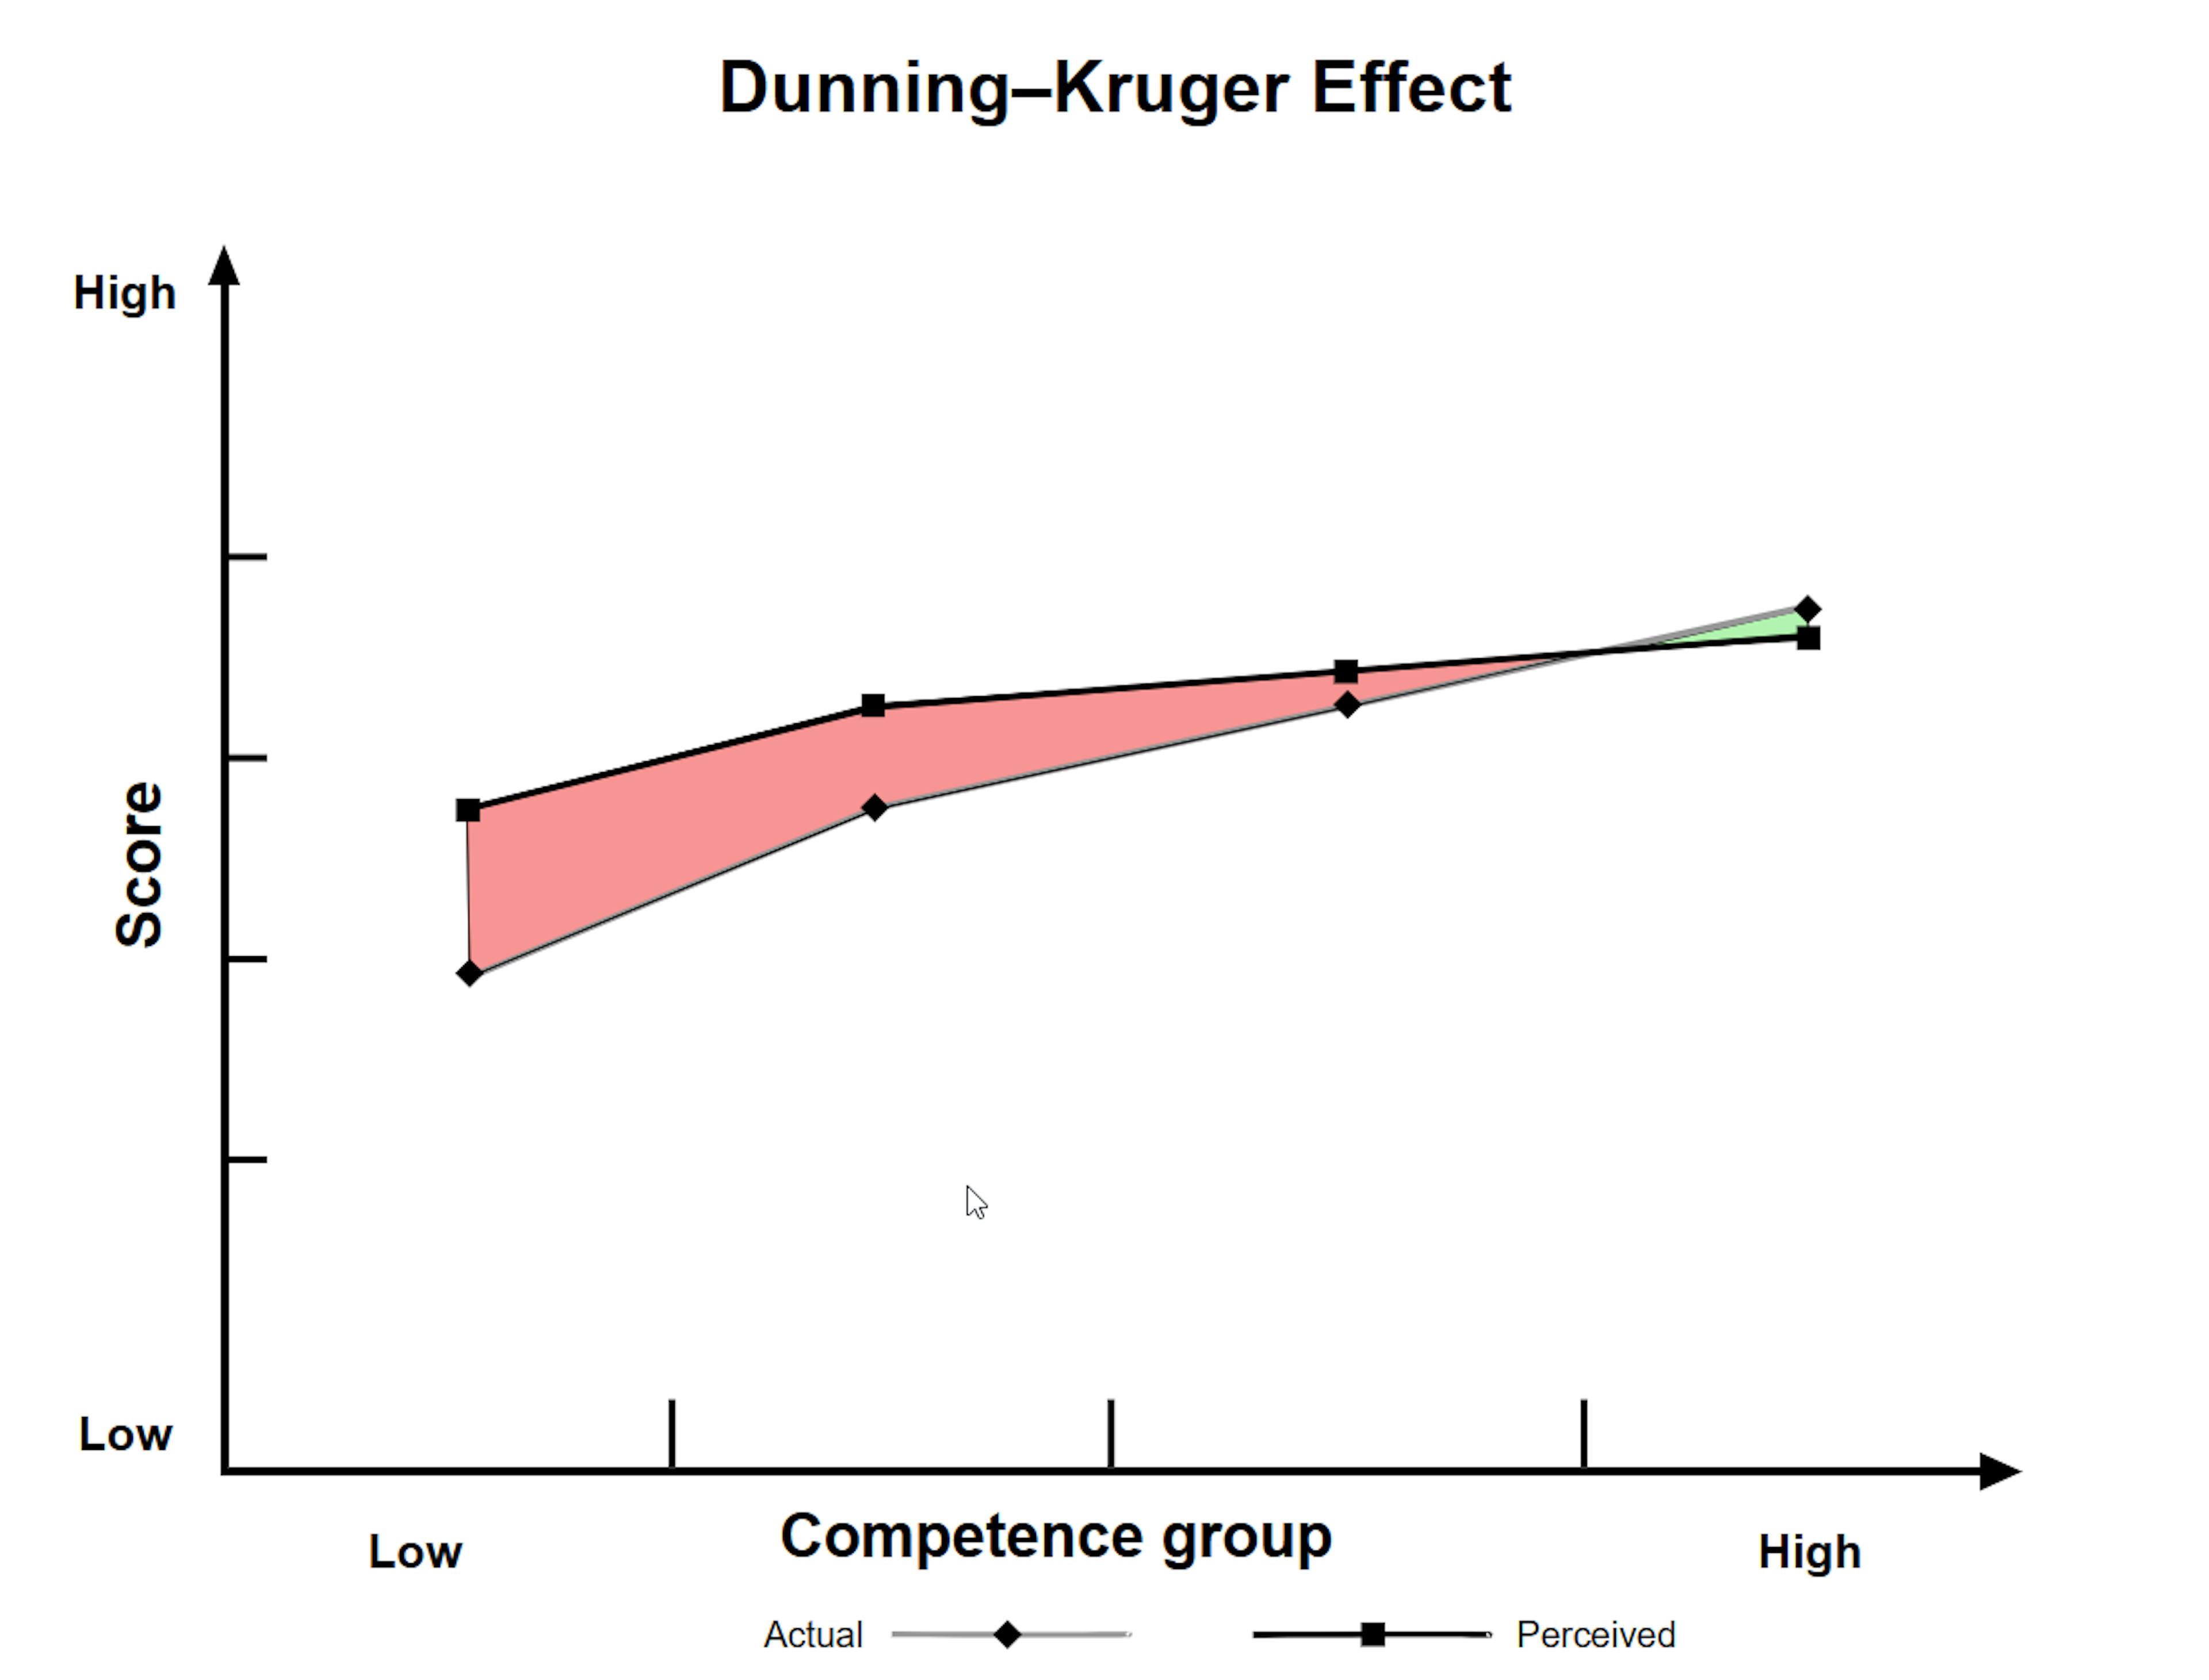 Image from Wikipedia. This image shows the actual and perceived knowledge of the competence group. Notice how the confidence level dips as the competence increases.